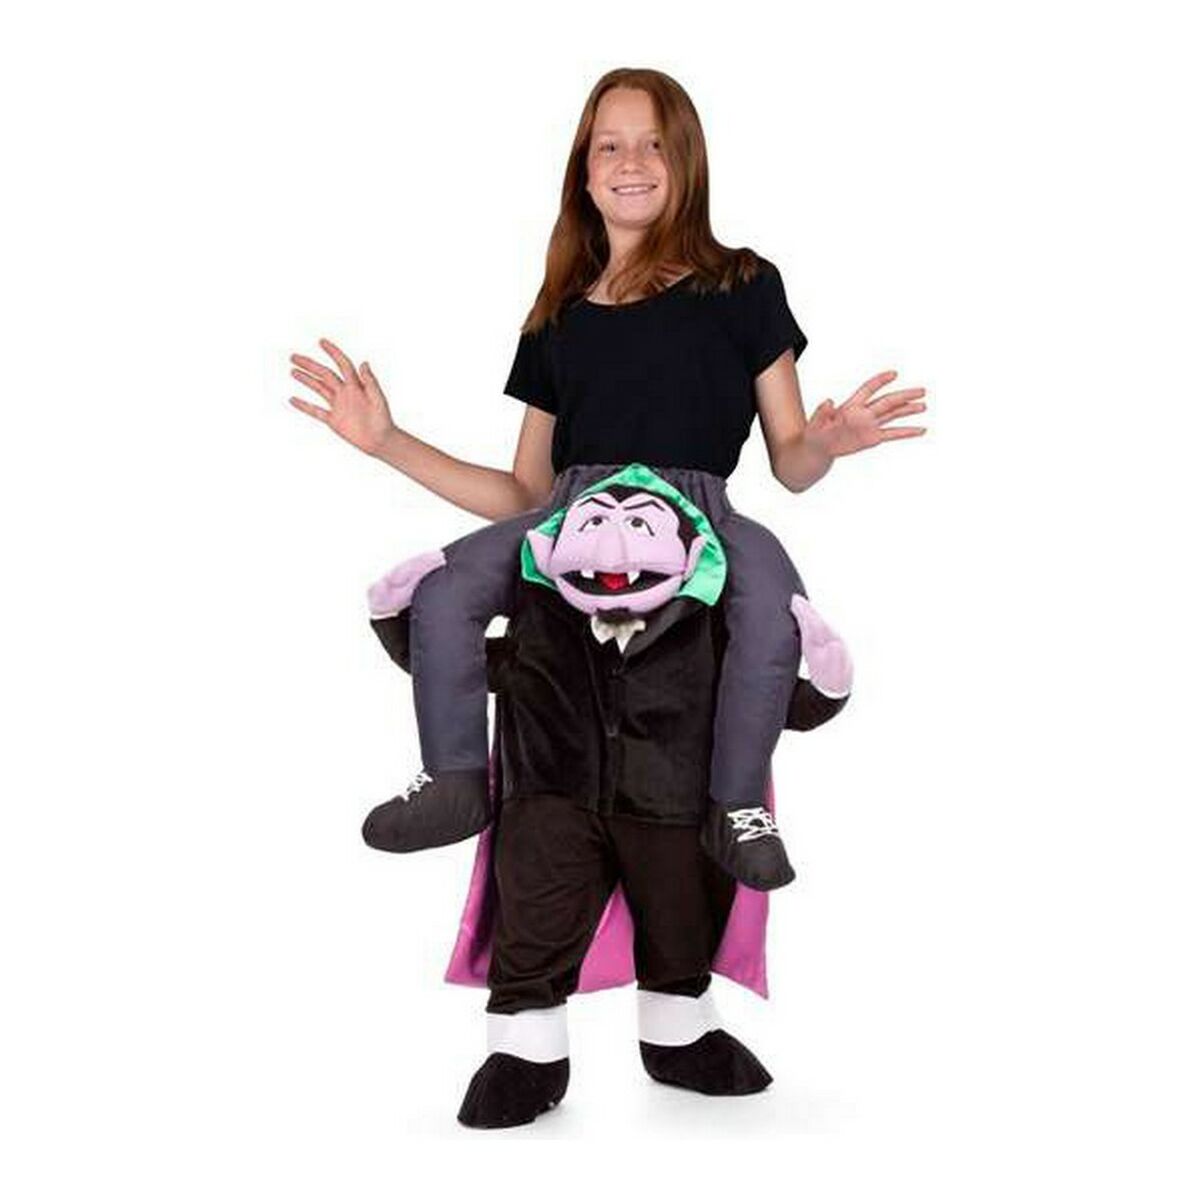 Costume for Children My Other Me Ride-On Conde Draco One size